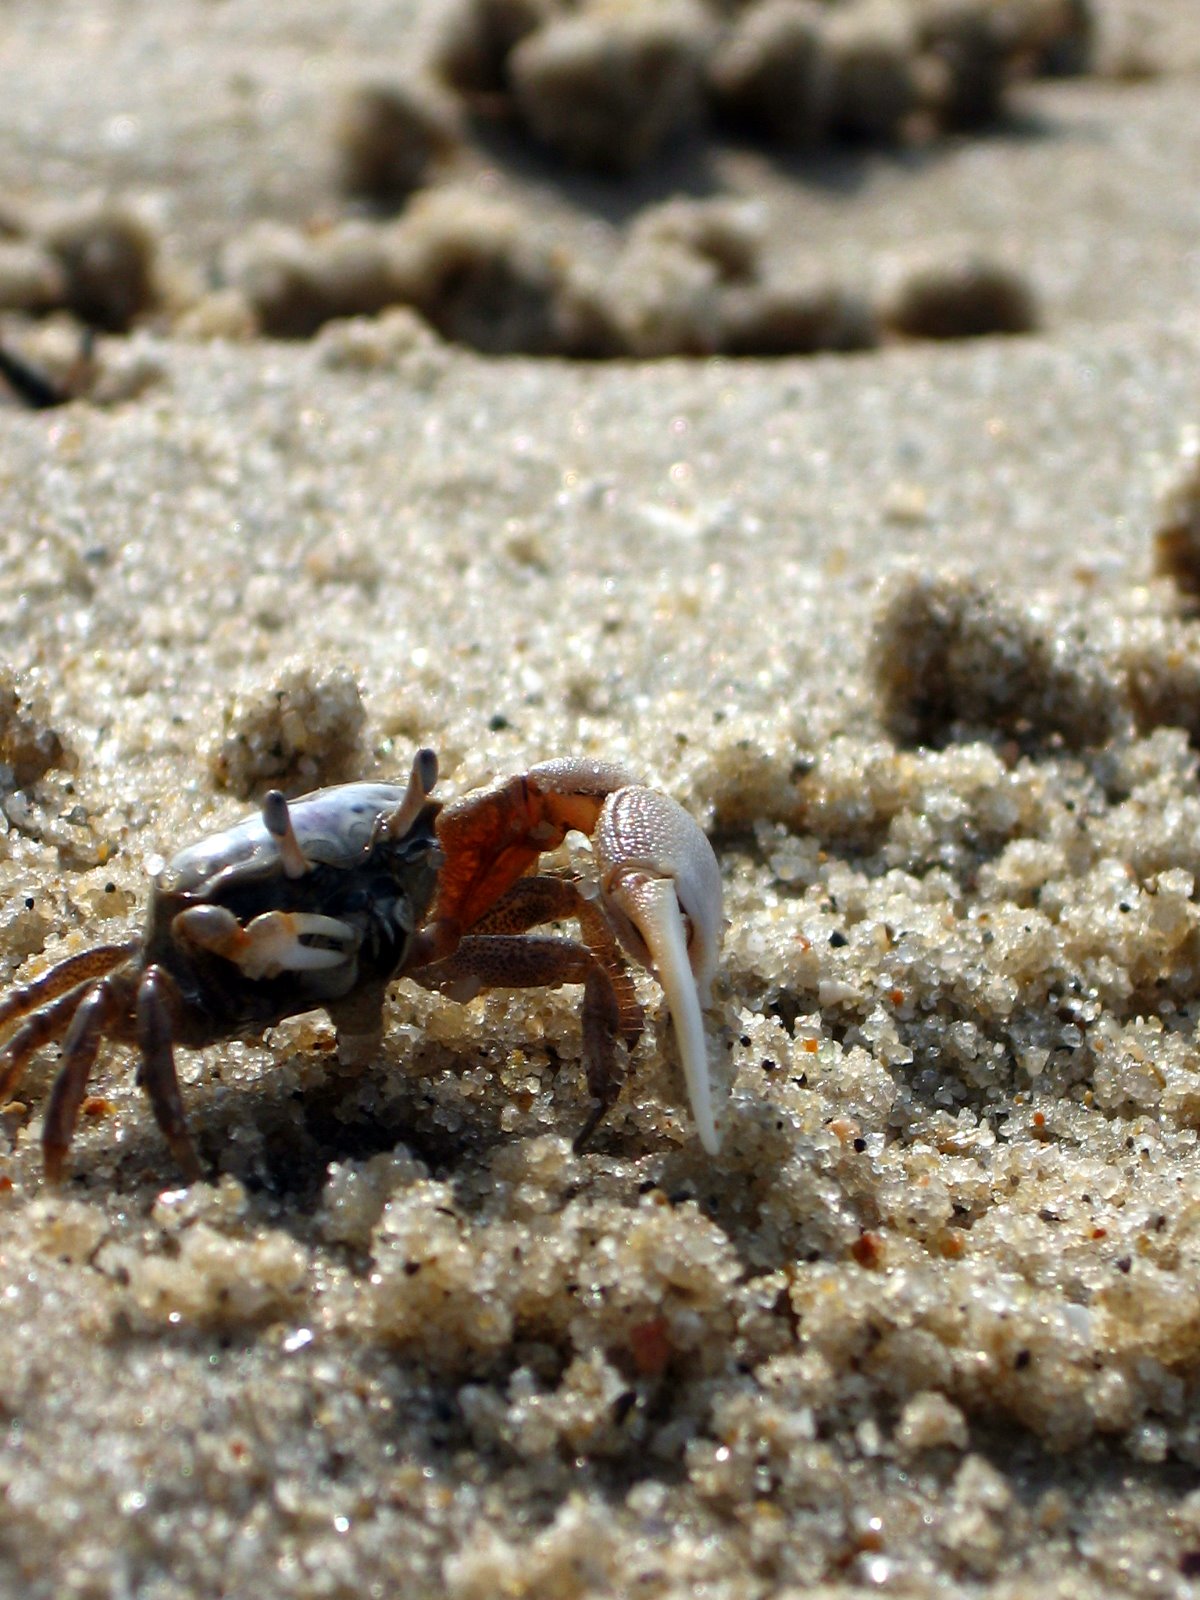 there is a crab on the beach with his legs up